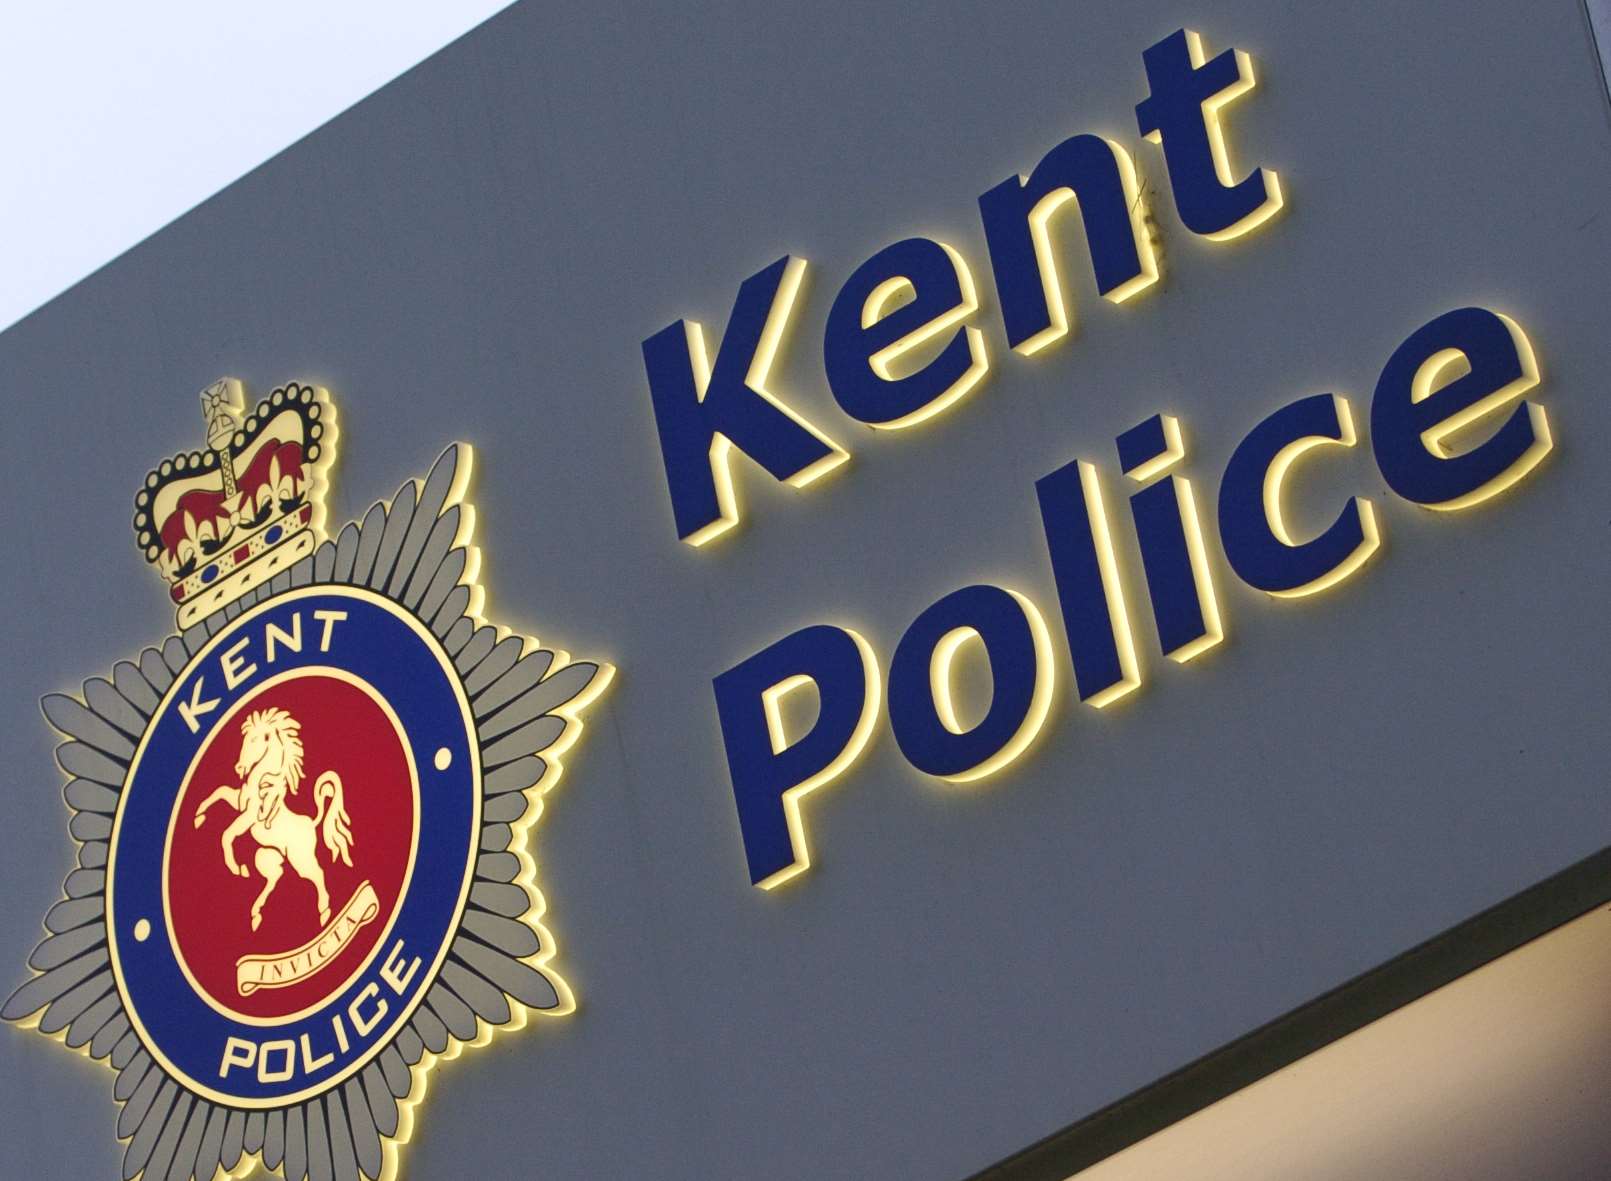 Kent Police have appealed the dfecision